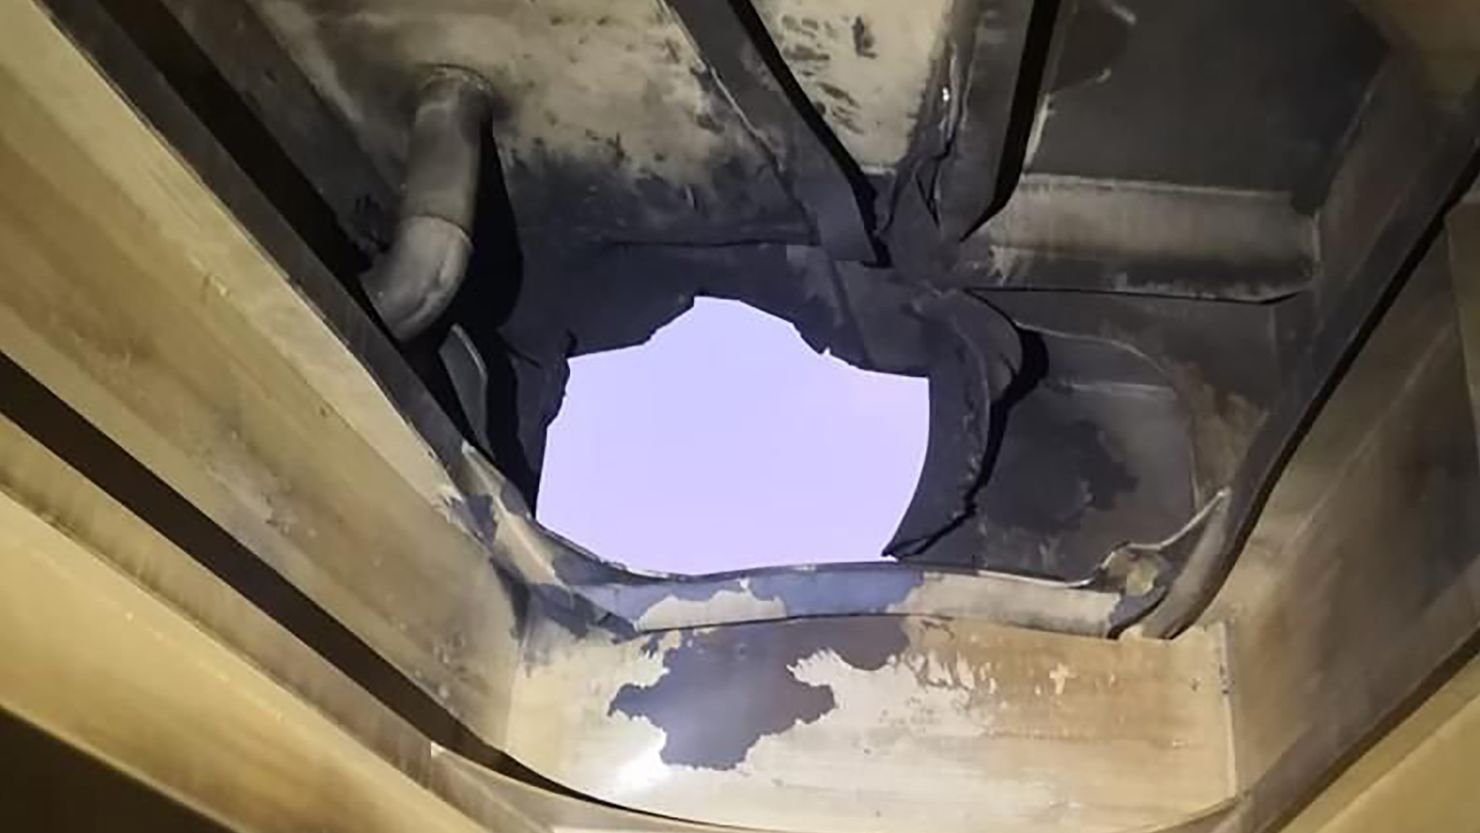 Damage to the tanker ship Pacific Zircon, which was struck by an exploding drone off the coast of Oman on November 15, 2022, according to US and Israeli officials. Photo obtained exclusively by CNN on November 17 from a Western defense official.